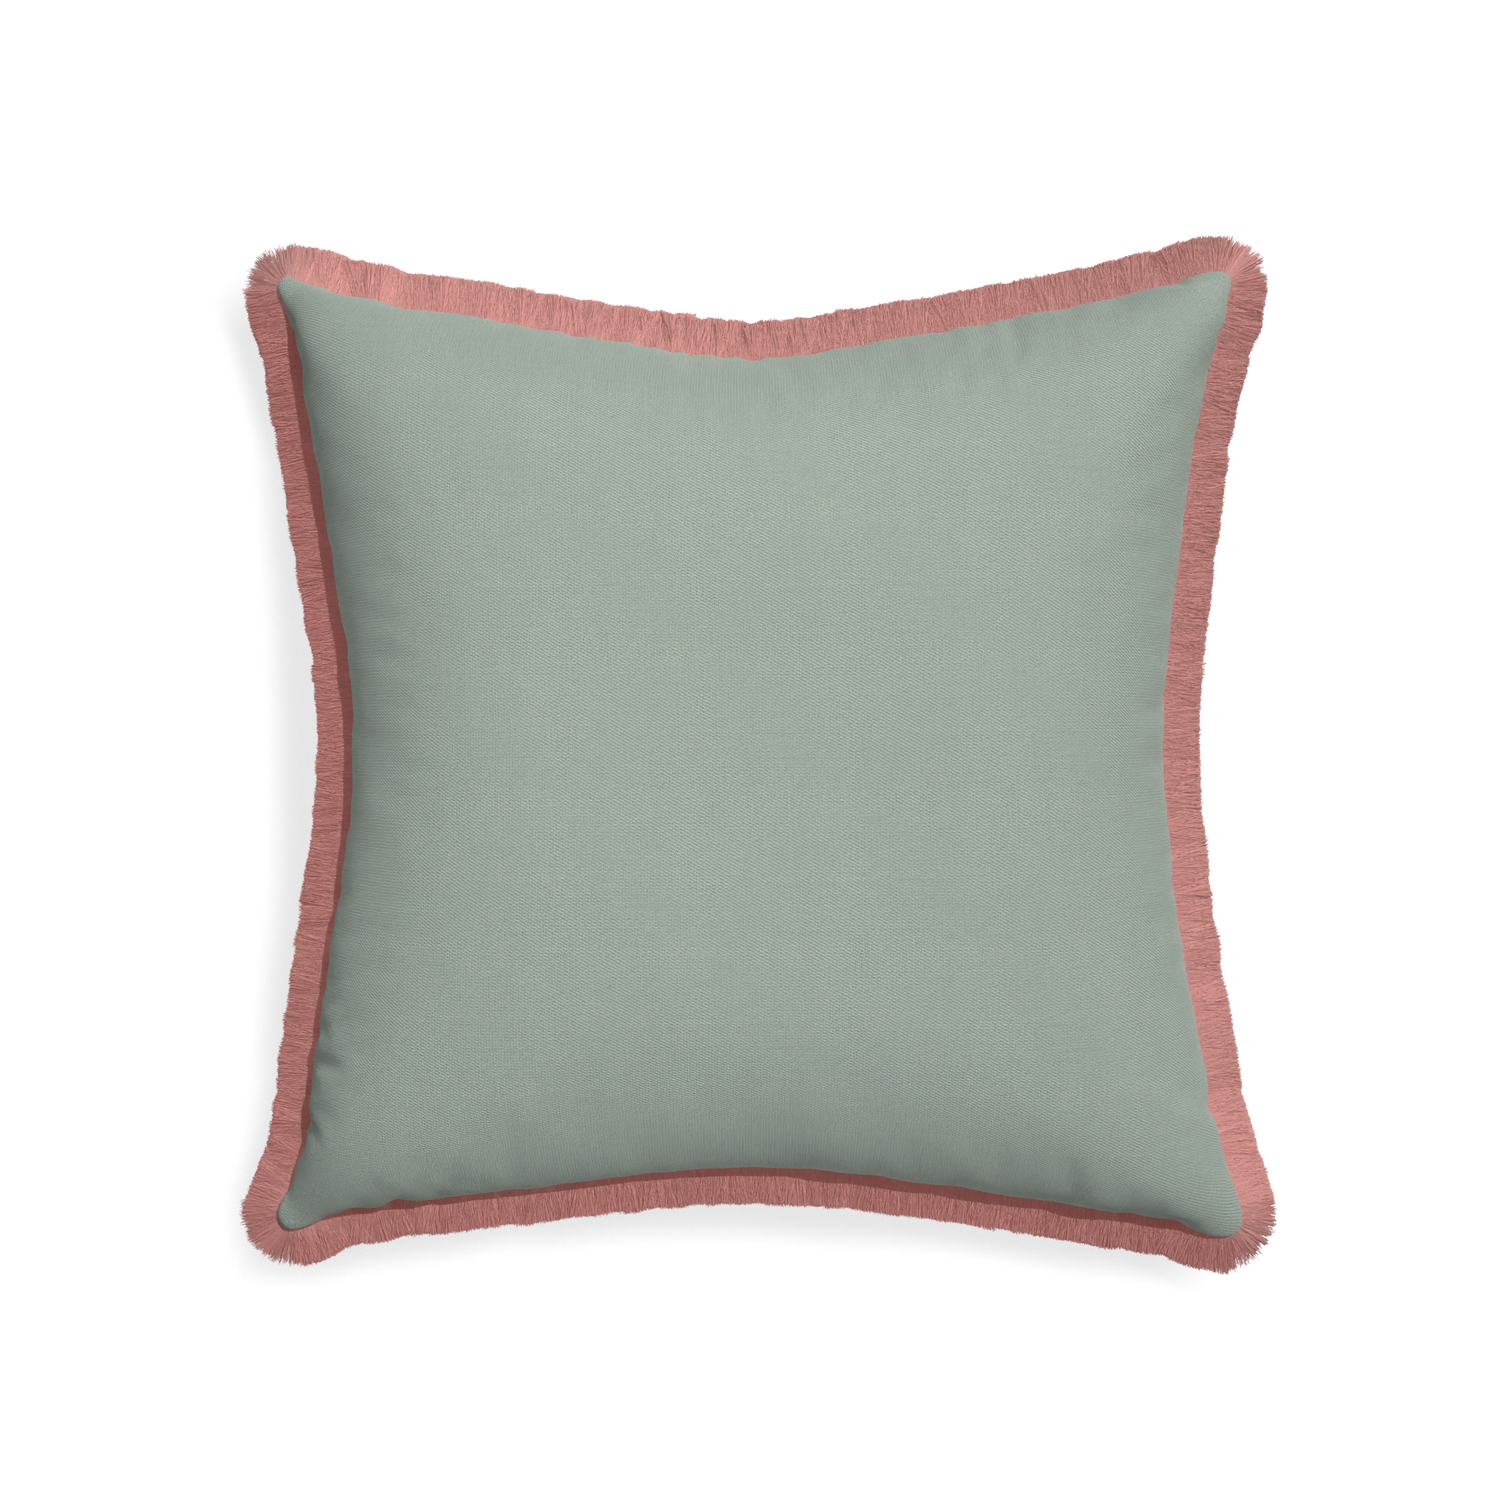 22-square sage custom sage green cottonpillow with d fringe on white background